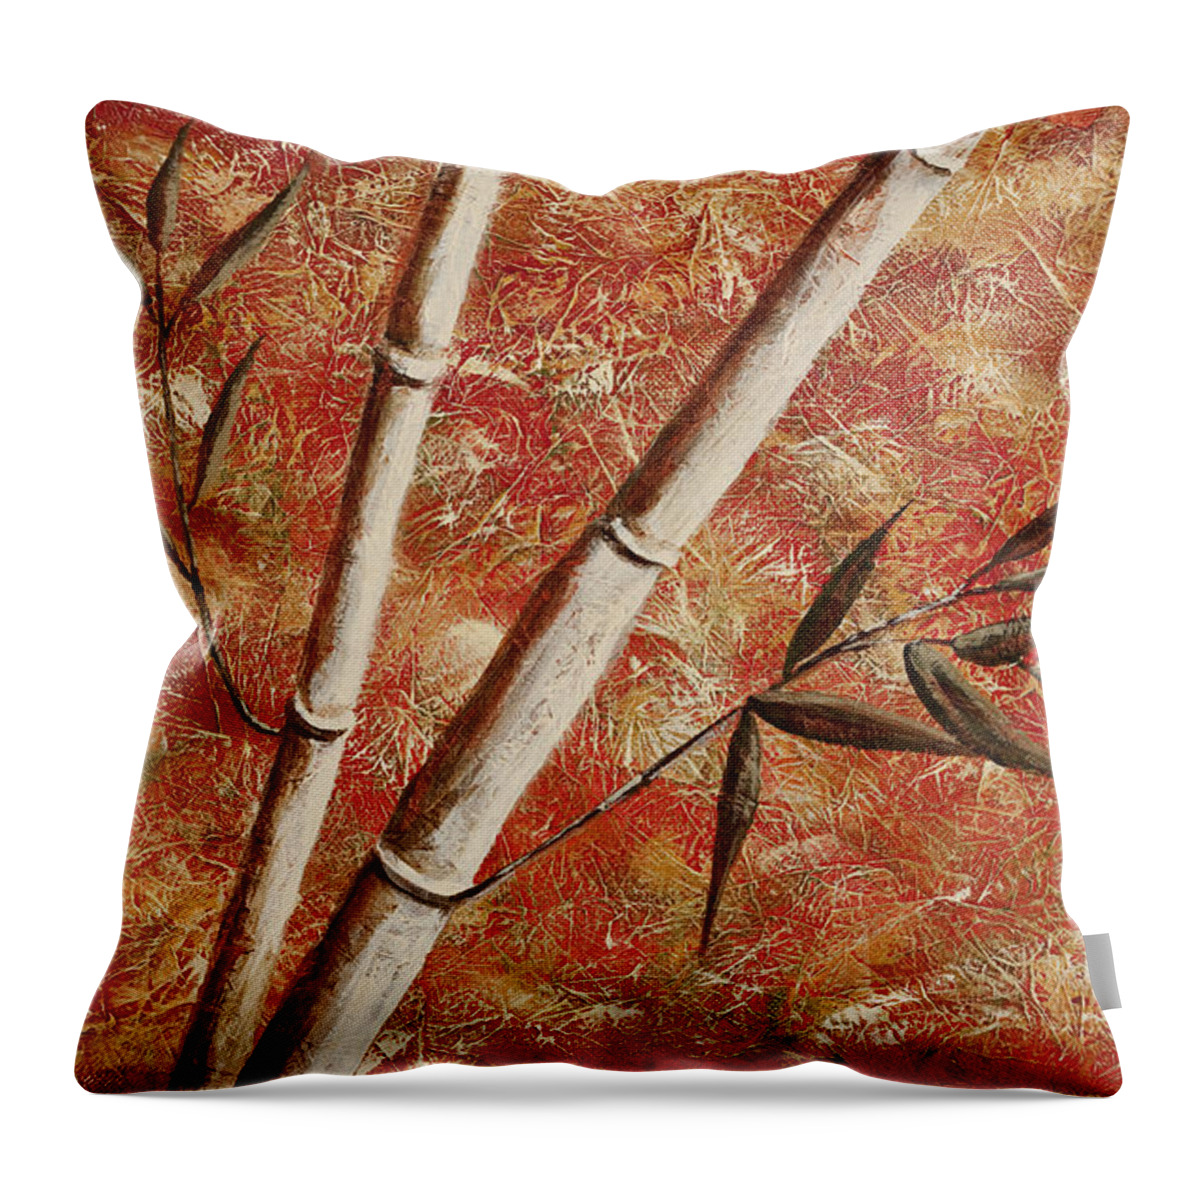 Bamboo Throw Pillow featuring the painting Bamboo 2 by Darice Machel McGuire